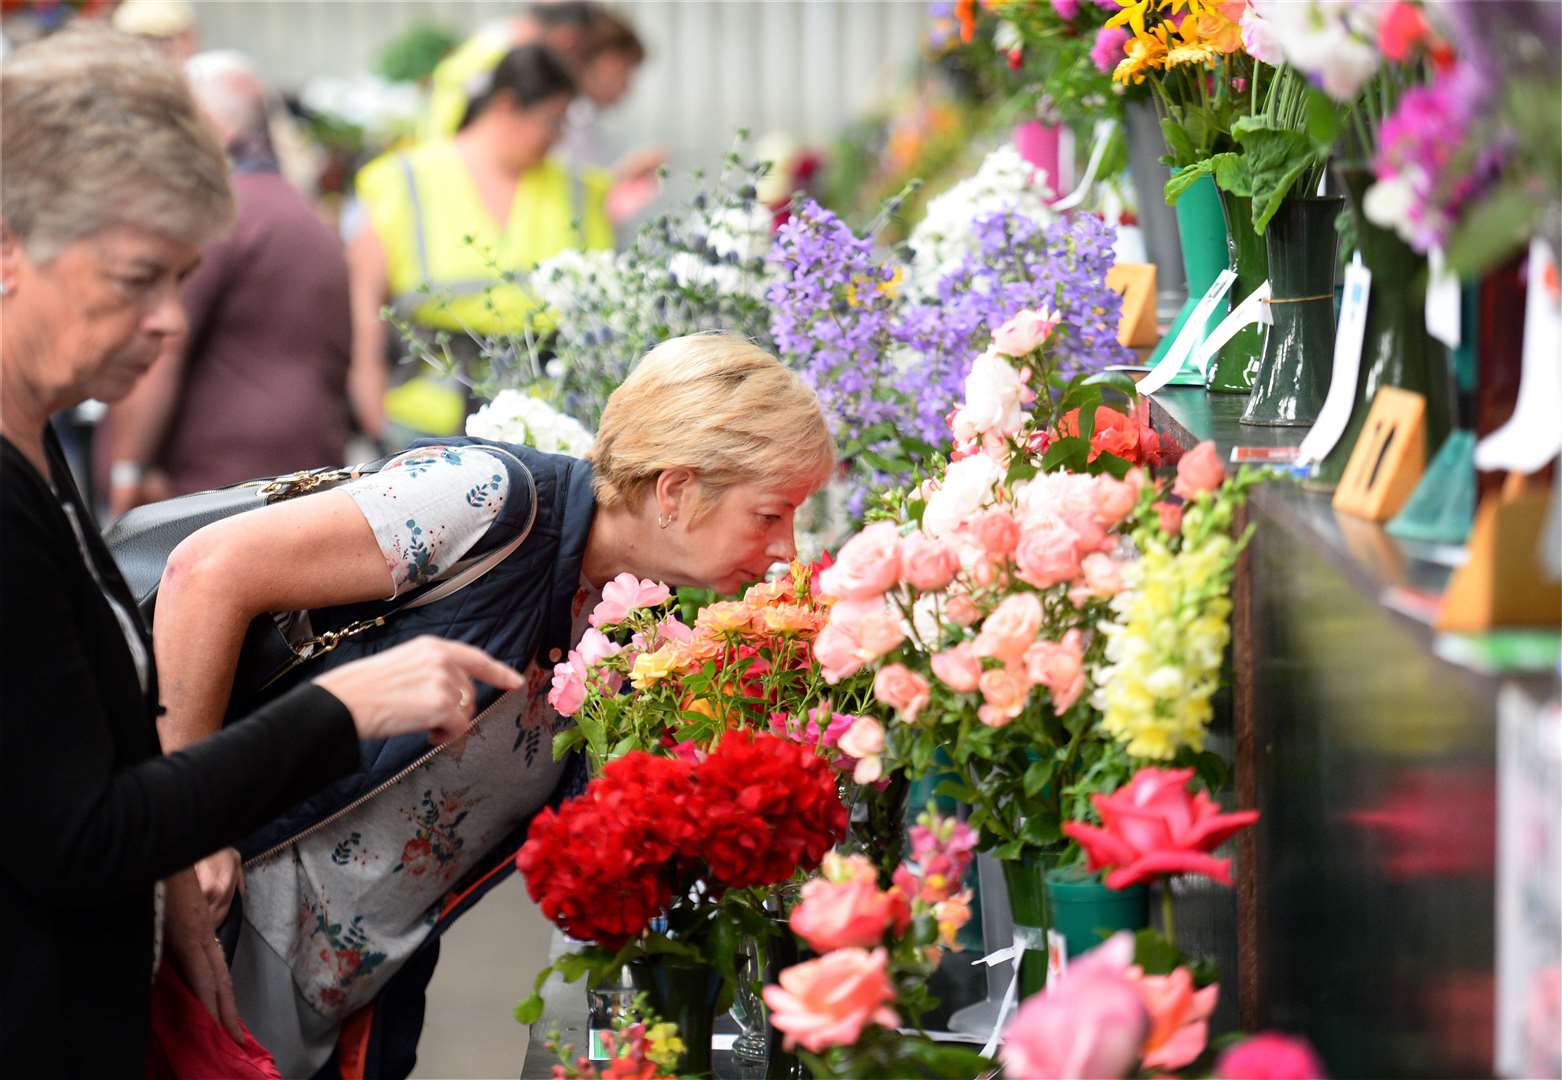 Perfume in the air at the 2019 Black Isle Show Flower Show. Photo: Gary Anthony.